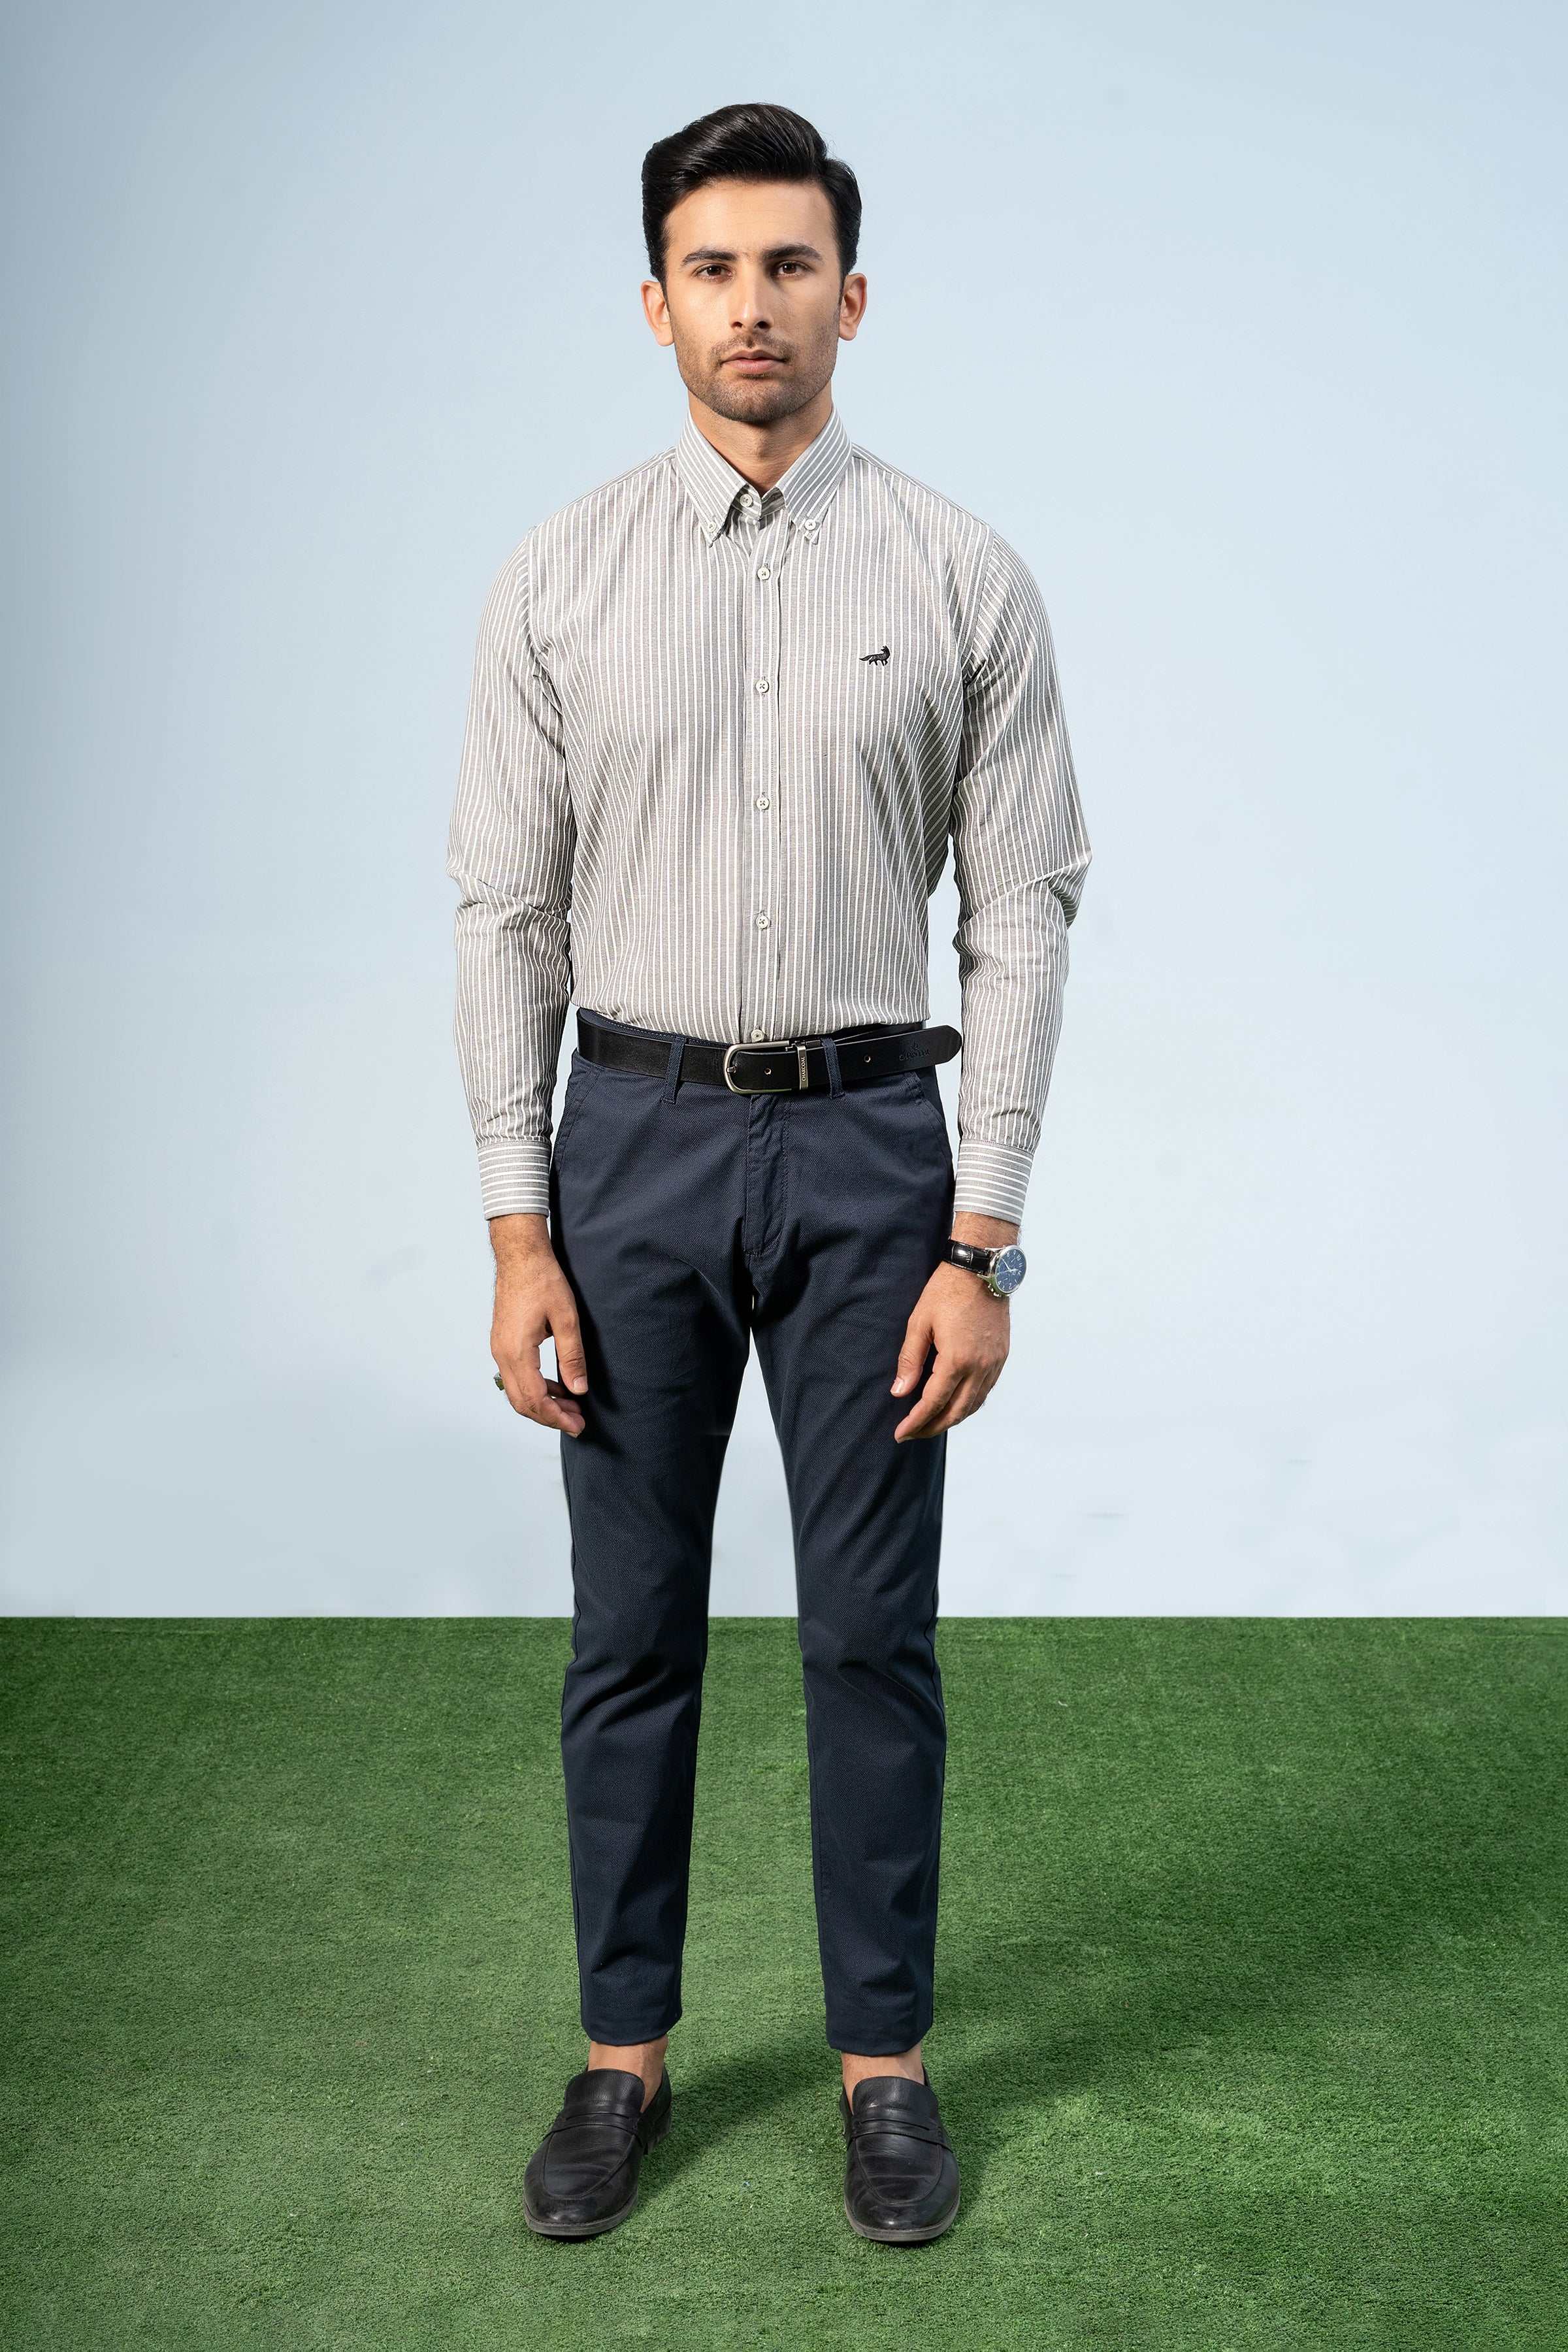 No-Brainer Shirt and Pants Combinations - Rath & Co. | Blue shirt black  pants, Black pants men, Mens shirt and tie